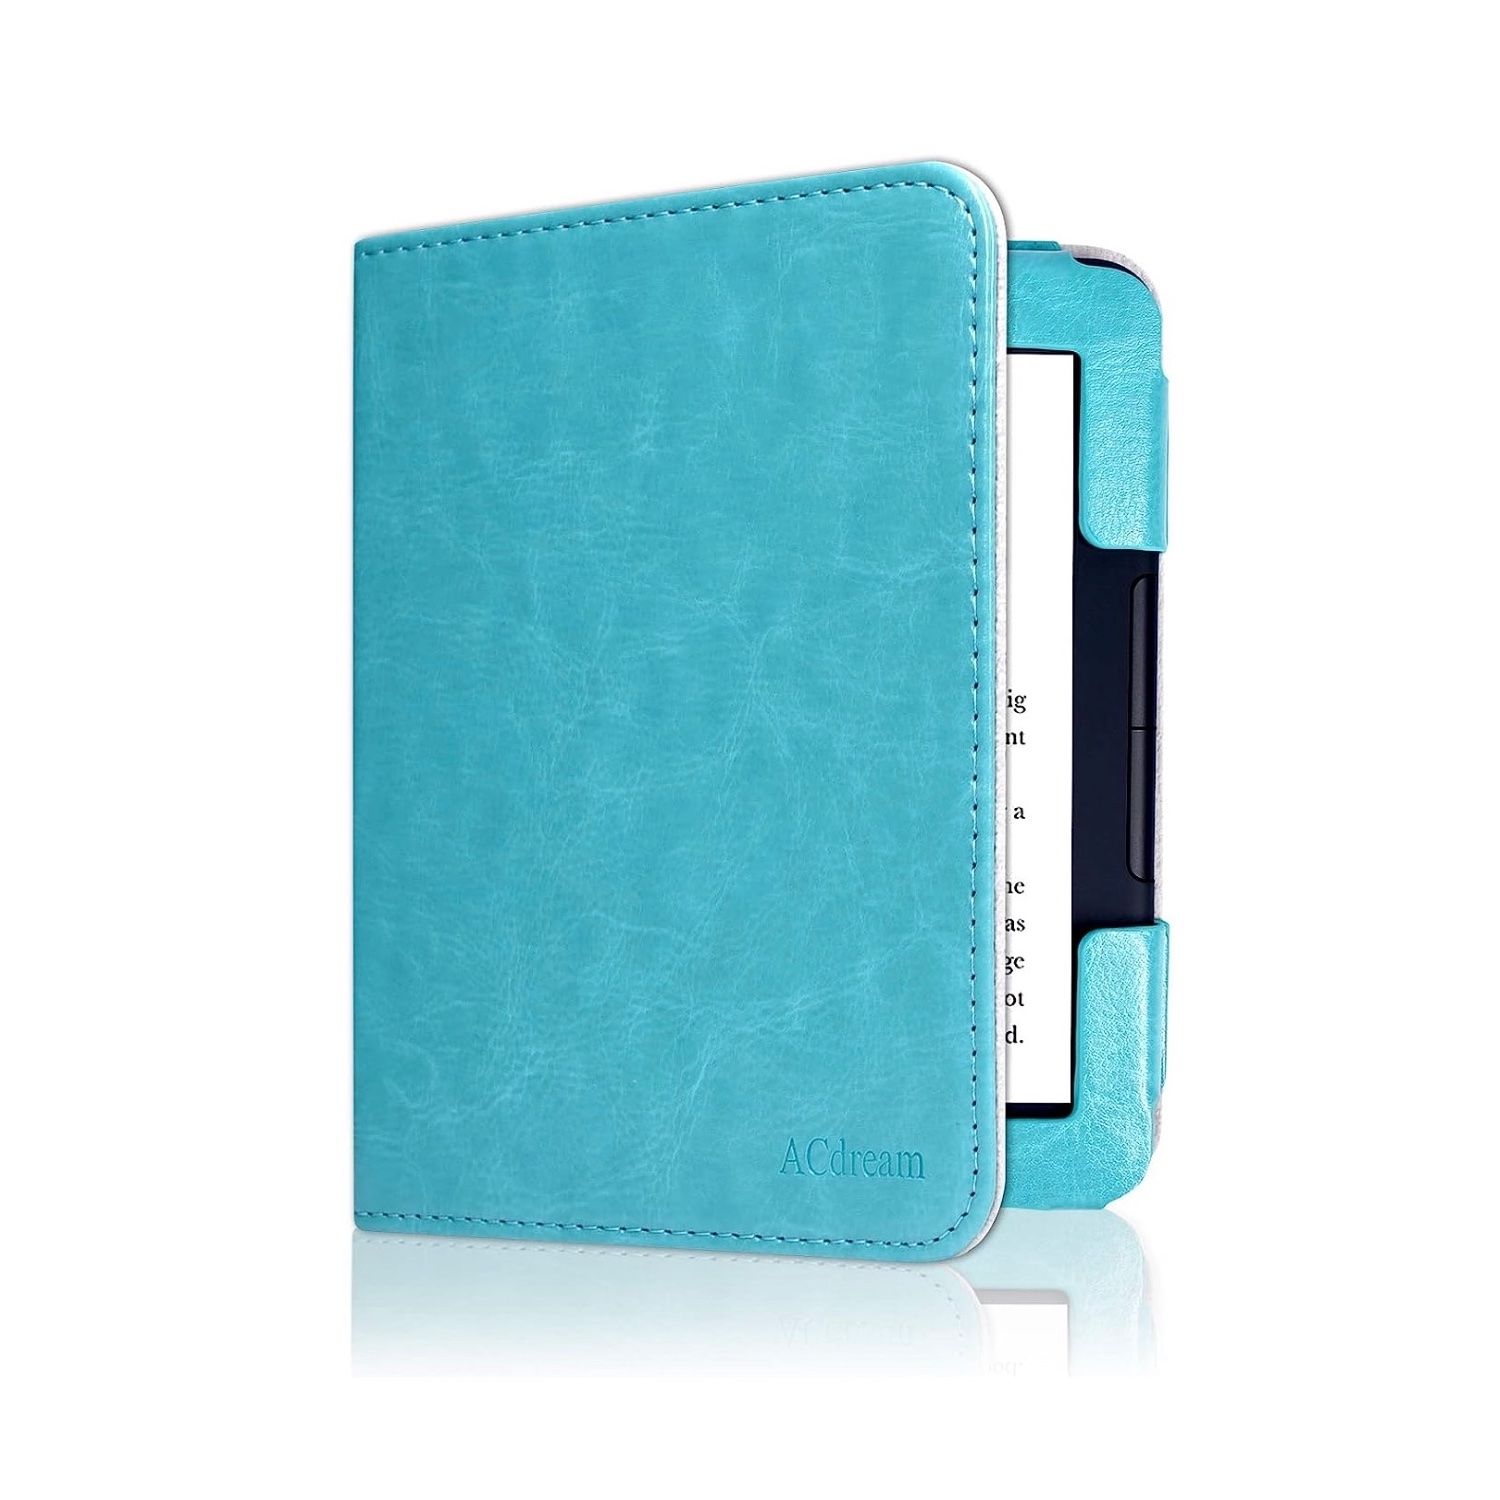 Sky Blue ACdream Case for Nook GlowLight 4:4e on a white background